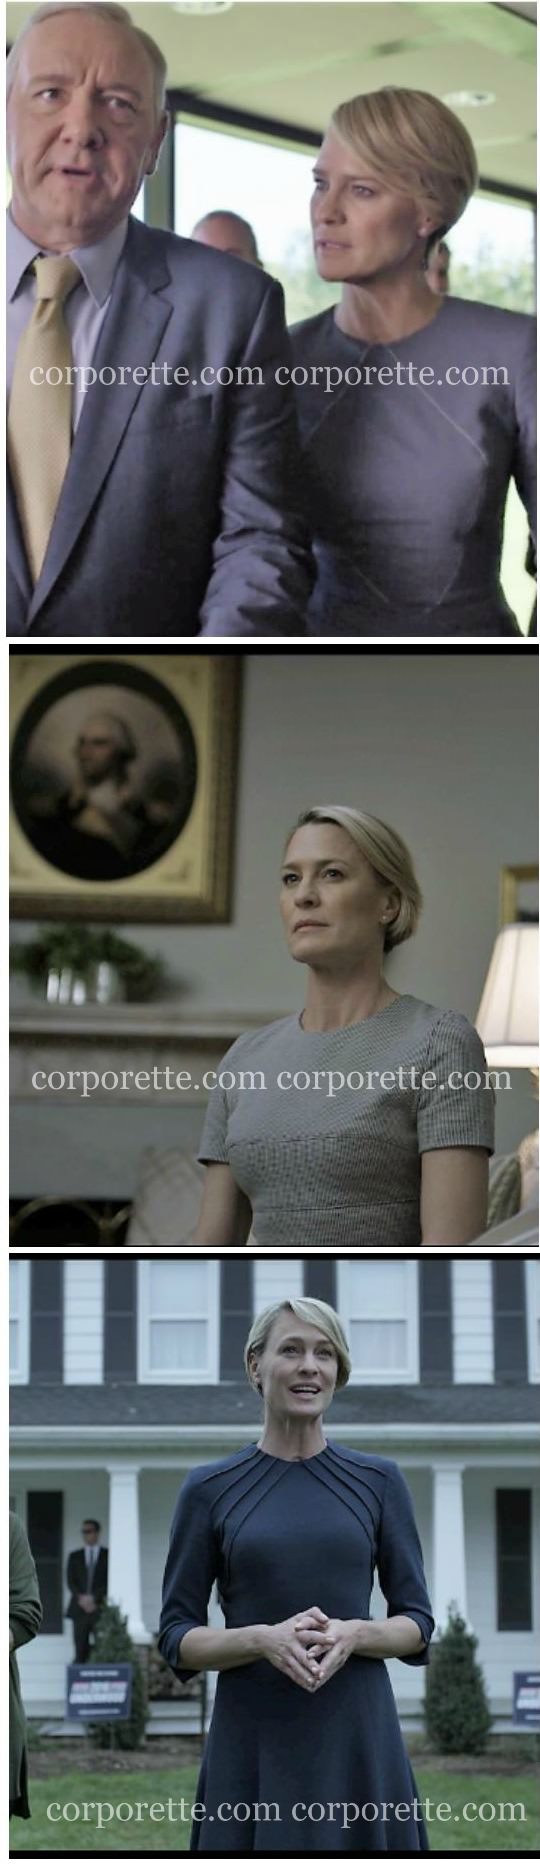 Here's a major style tip from Claire Underwood in House of Cards: opt for interesting seaming instead of jewelry. See more workwear inspiration and fashion tips in our roundup.